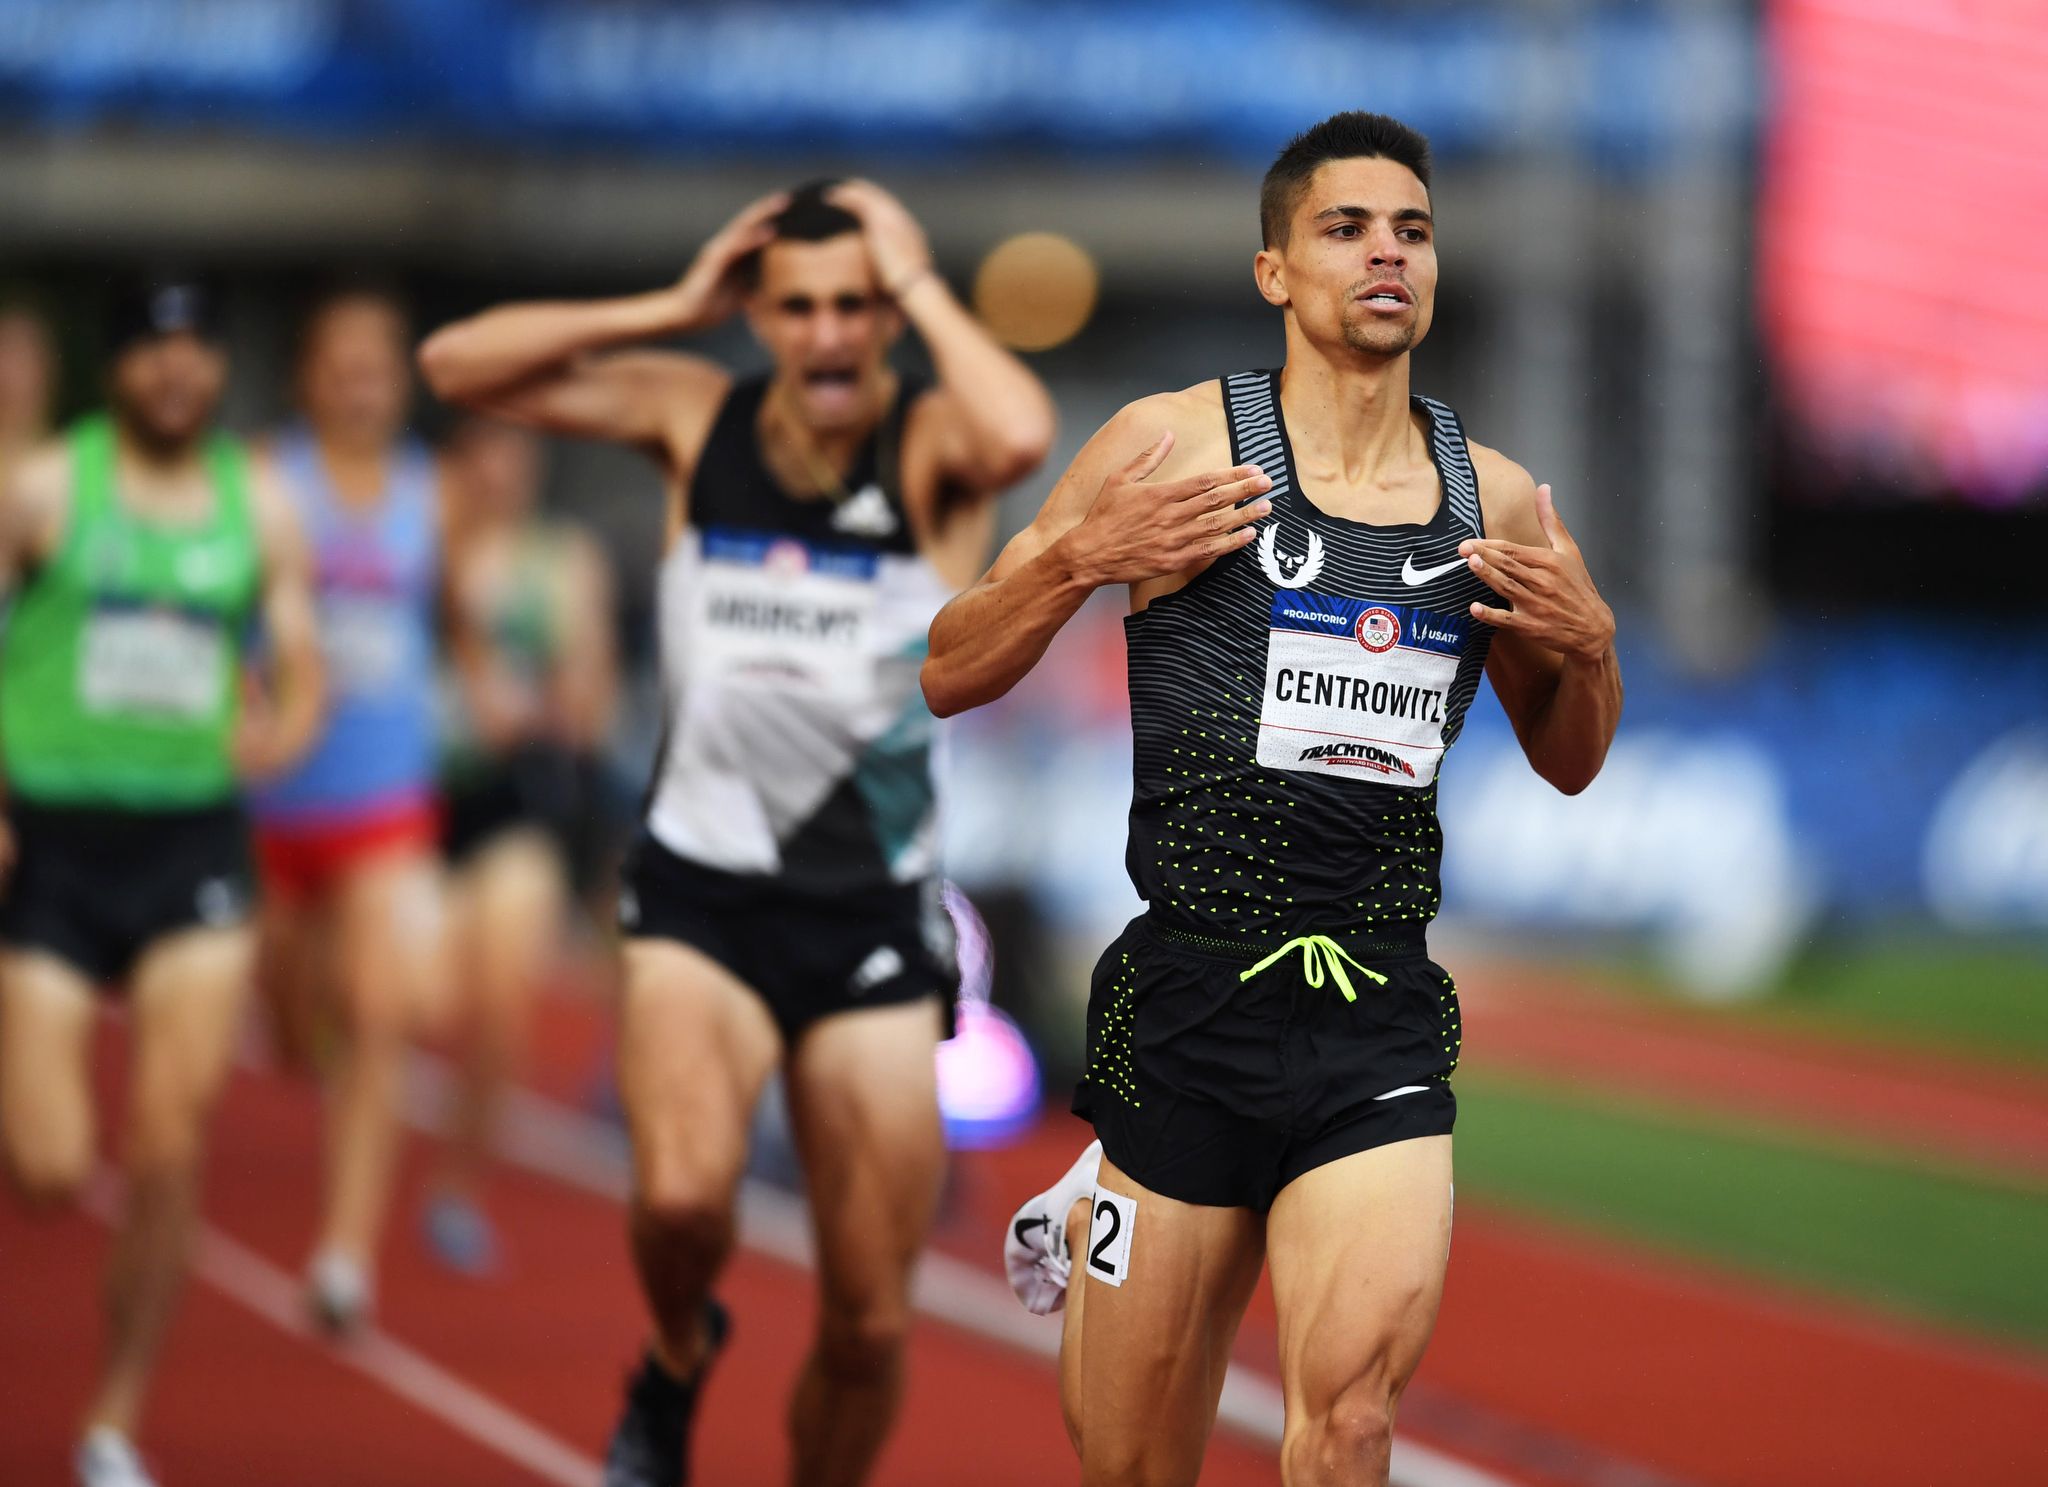 Matthew Centrowitz U.S. Olympic track and field trials Best photos